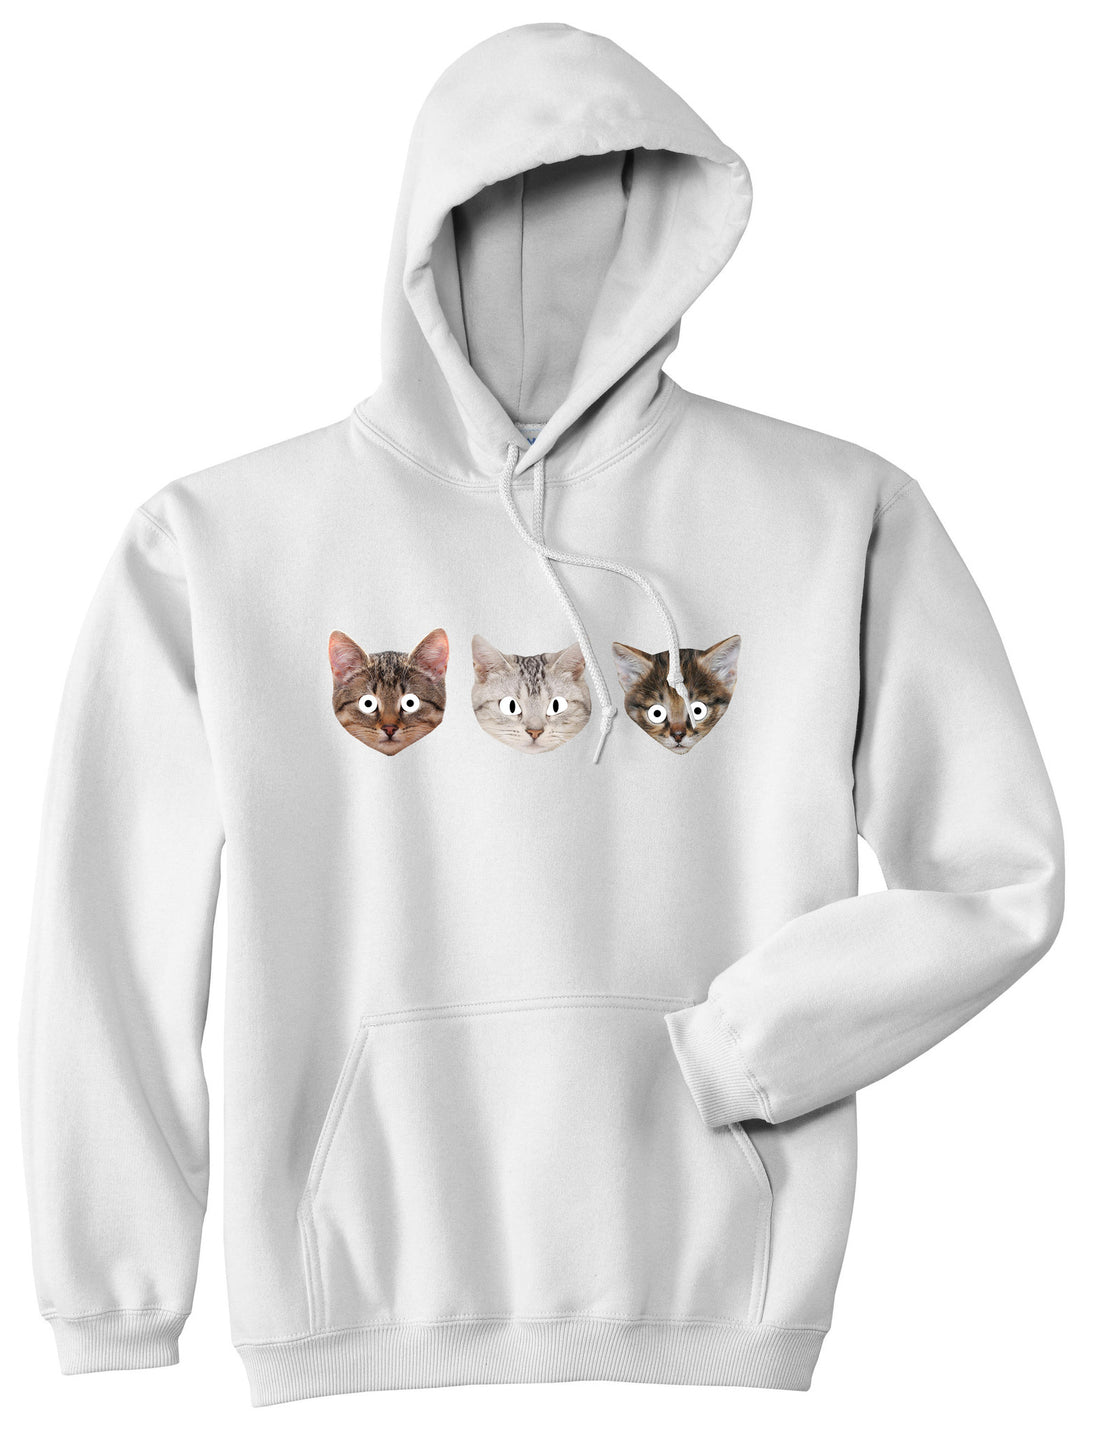 Cats Crazy Kittens Pullover Hoodie in White By Kings Of NY